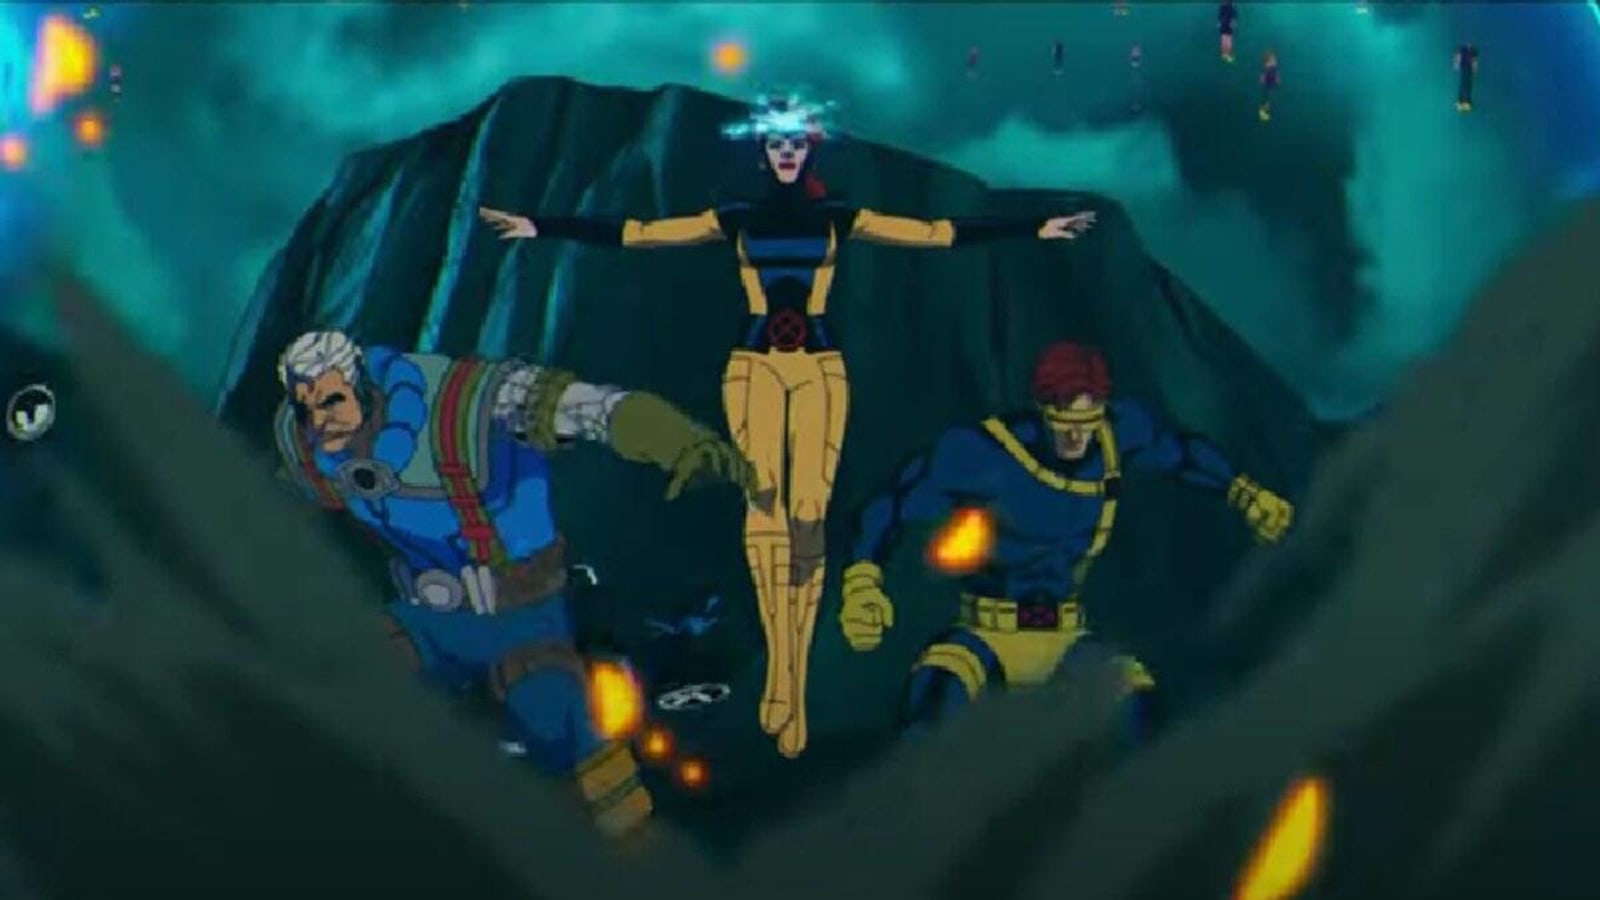 Final X-MEN ’97 Trailer Teases Ominous Things to Come in the Last 3 Episodes